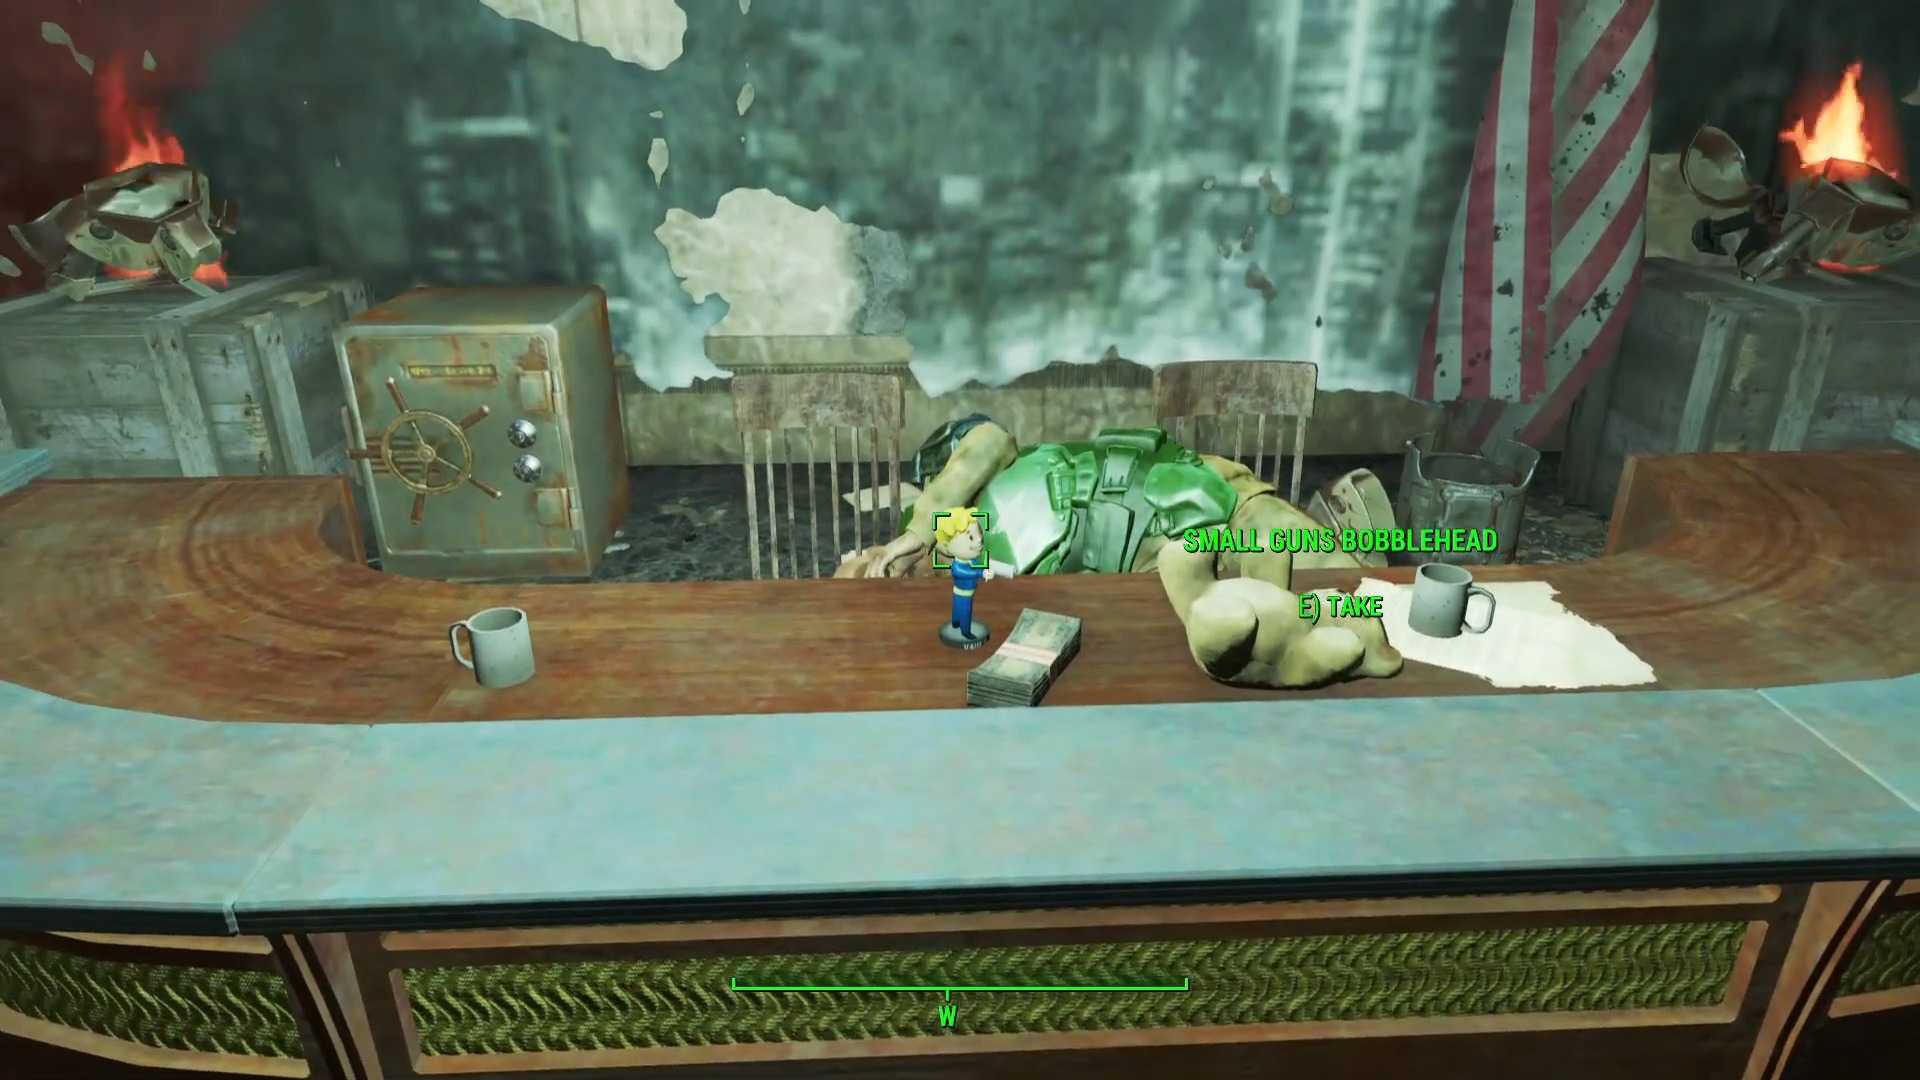 The Small Guns Bobblehead in Fallout 4